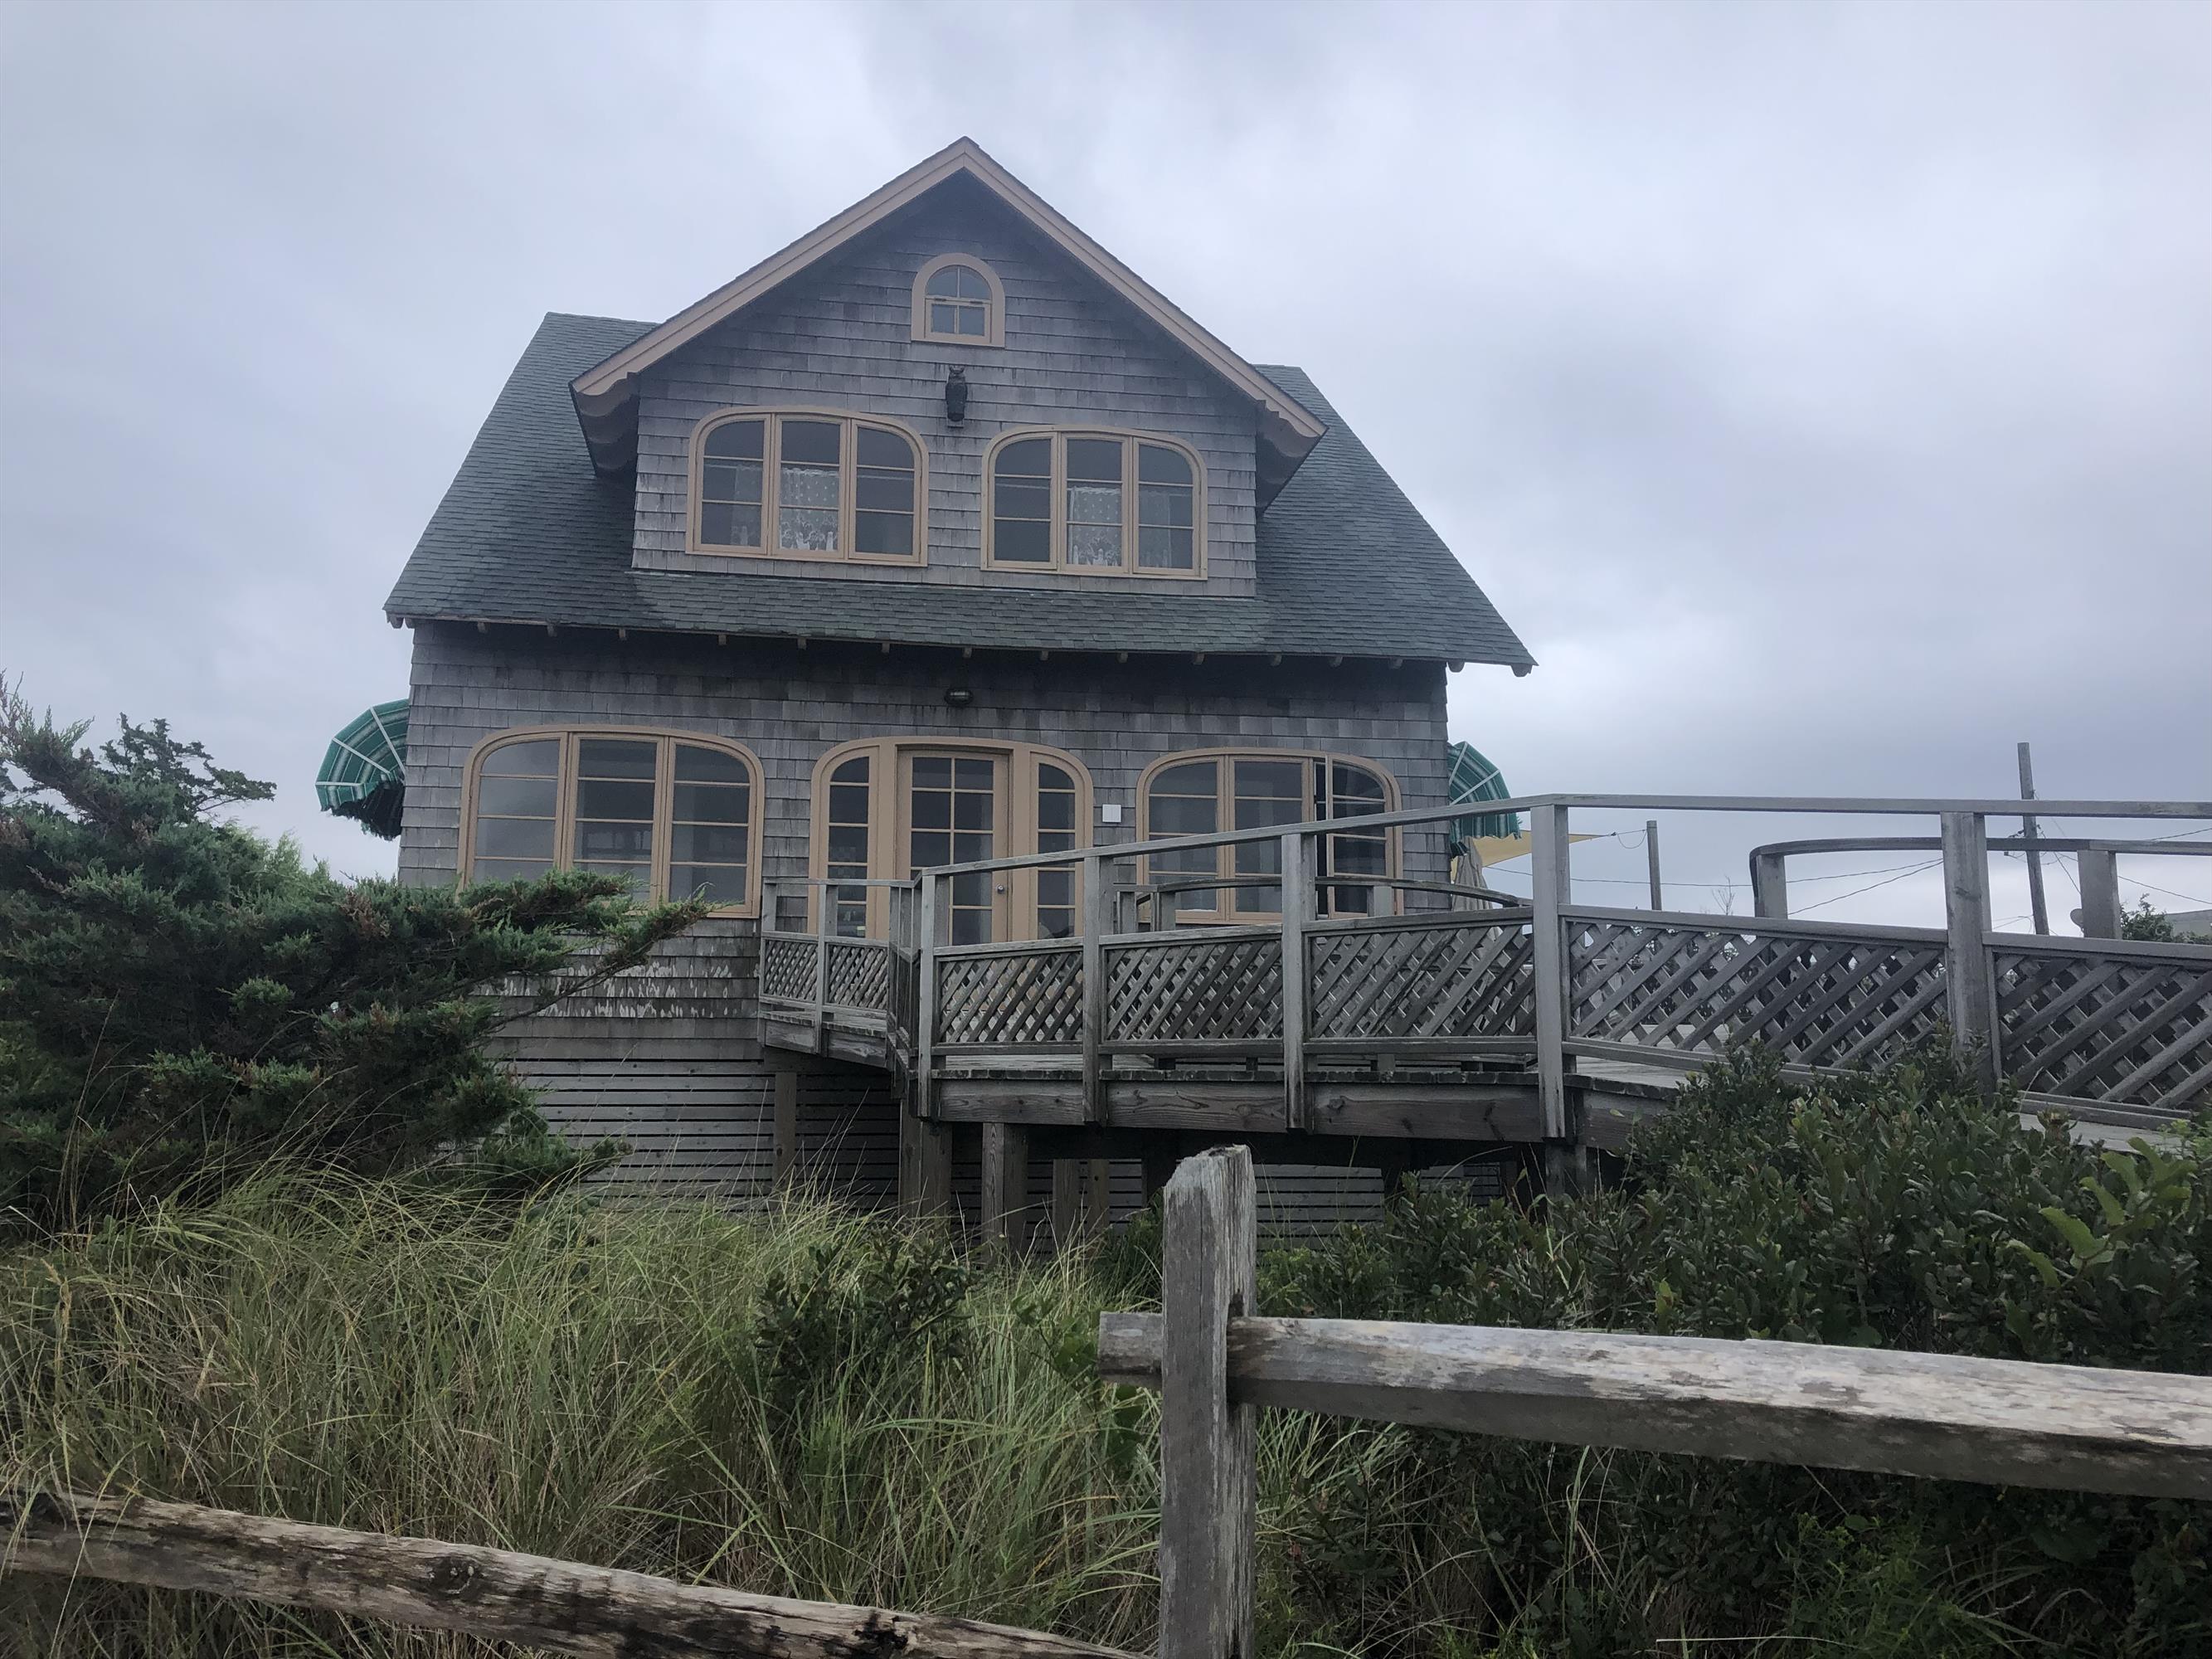 Come stay in this bay front rental and enjoy amazing sunsets from your front porch. This house features 3 bedrooms plus additional beds in the front porch perfect for up to 8 people. Short walk to Ocean Beach but still have the quietness of Seaview.  